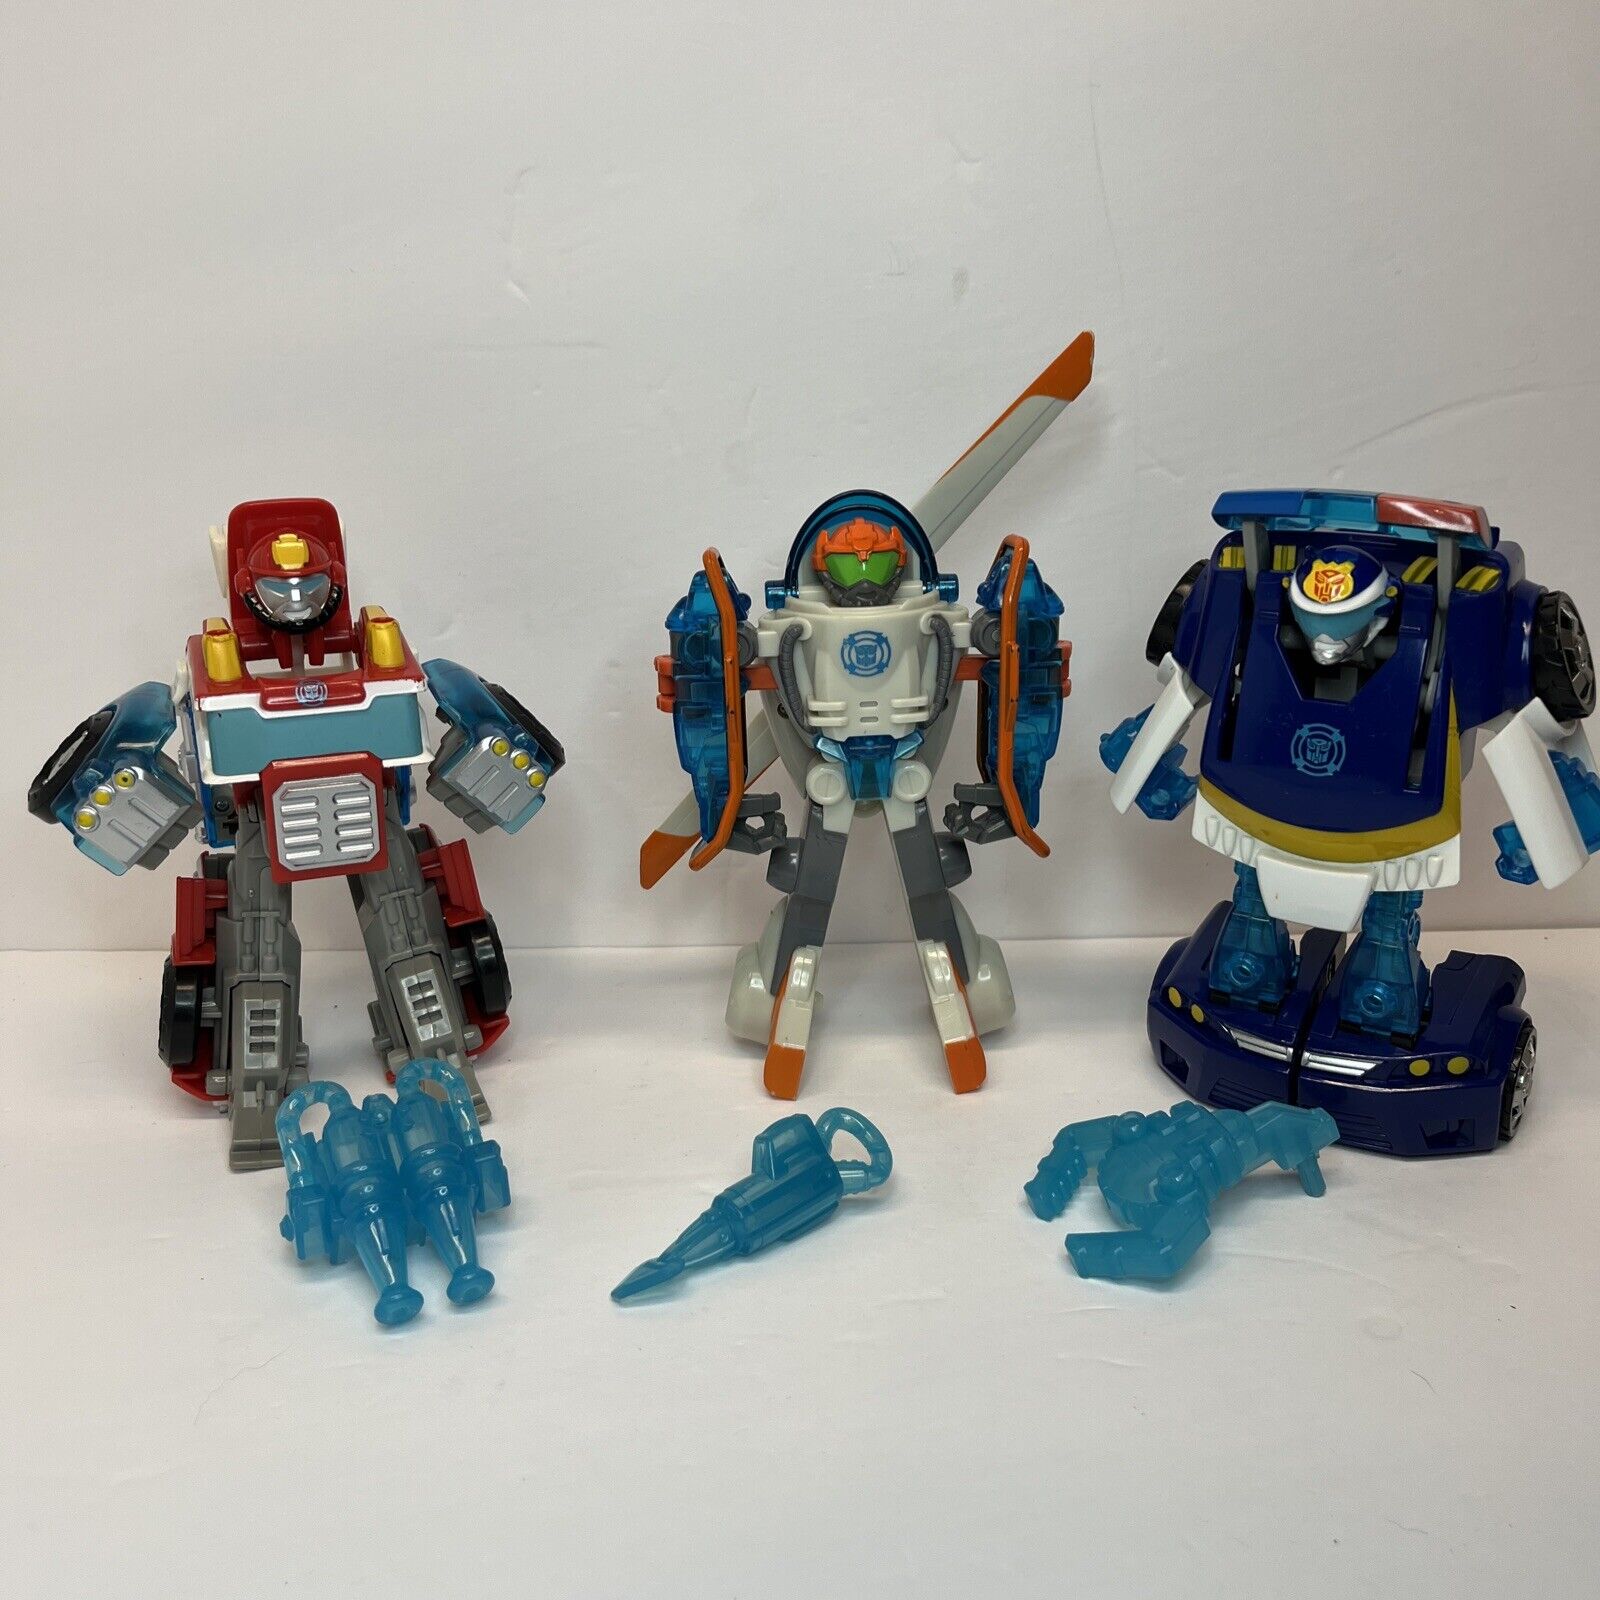 LOT of 3 - Hasbro TRANSFORMERS - Playskool  - RESCUE BOTS - Prime Chase Blades